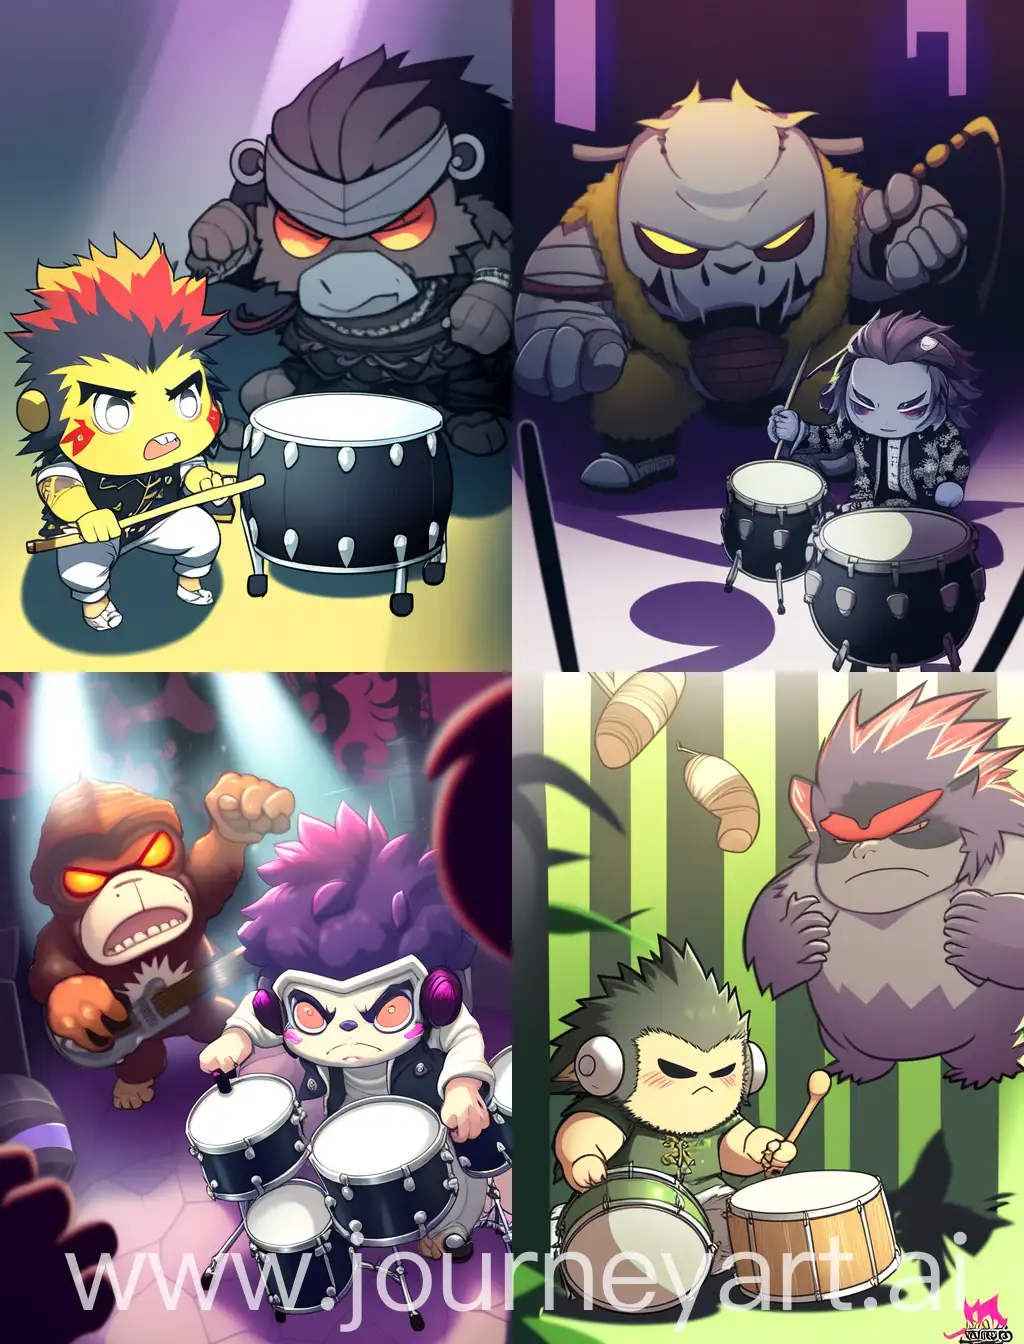 Chibi-Gorilla-and-Anime-Guy-Drumming-in-Spooky-Setting